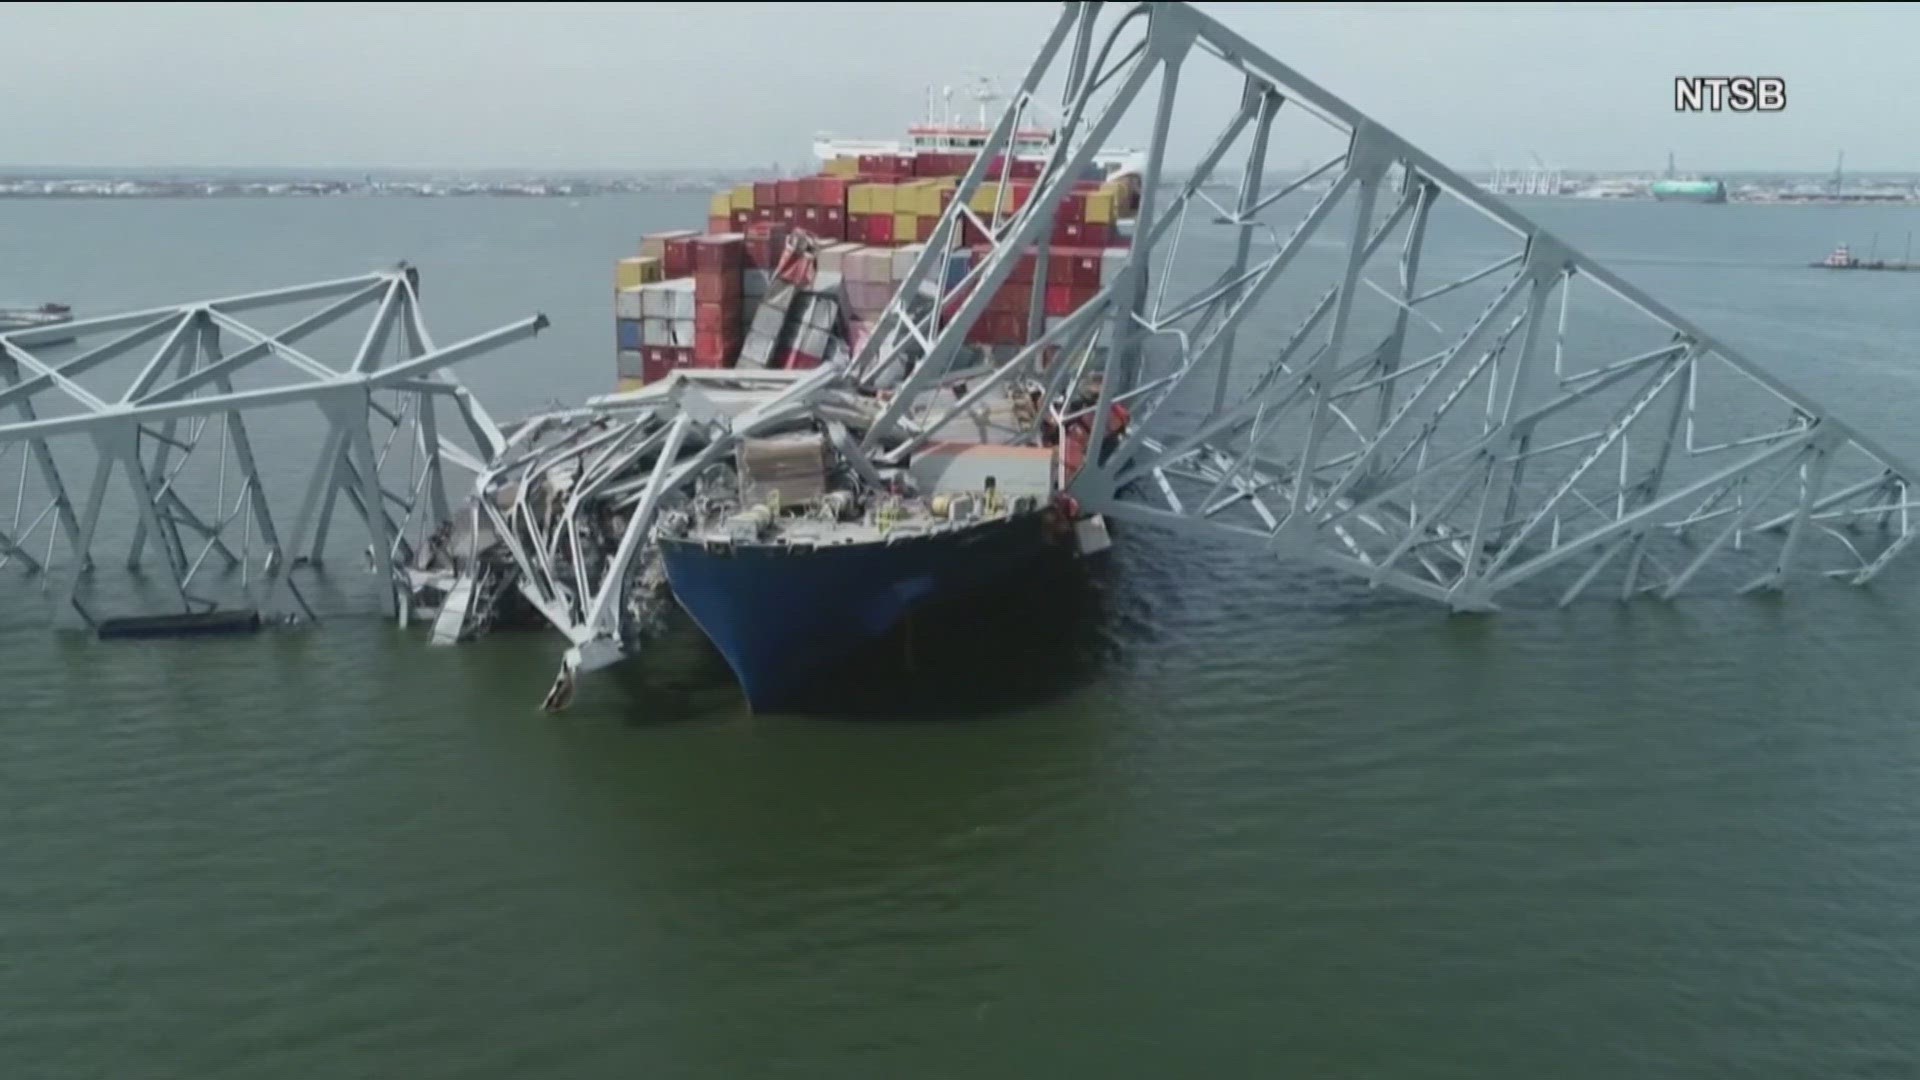 National Transportation Safety Board officials began their investigation into the Baltimore bridge tragedy, inspecting the cargo ship that caused its collapse.